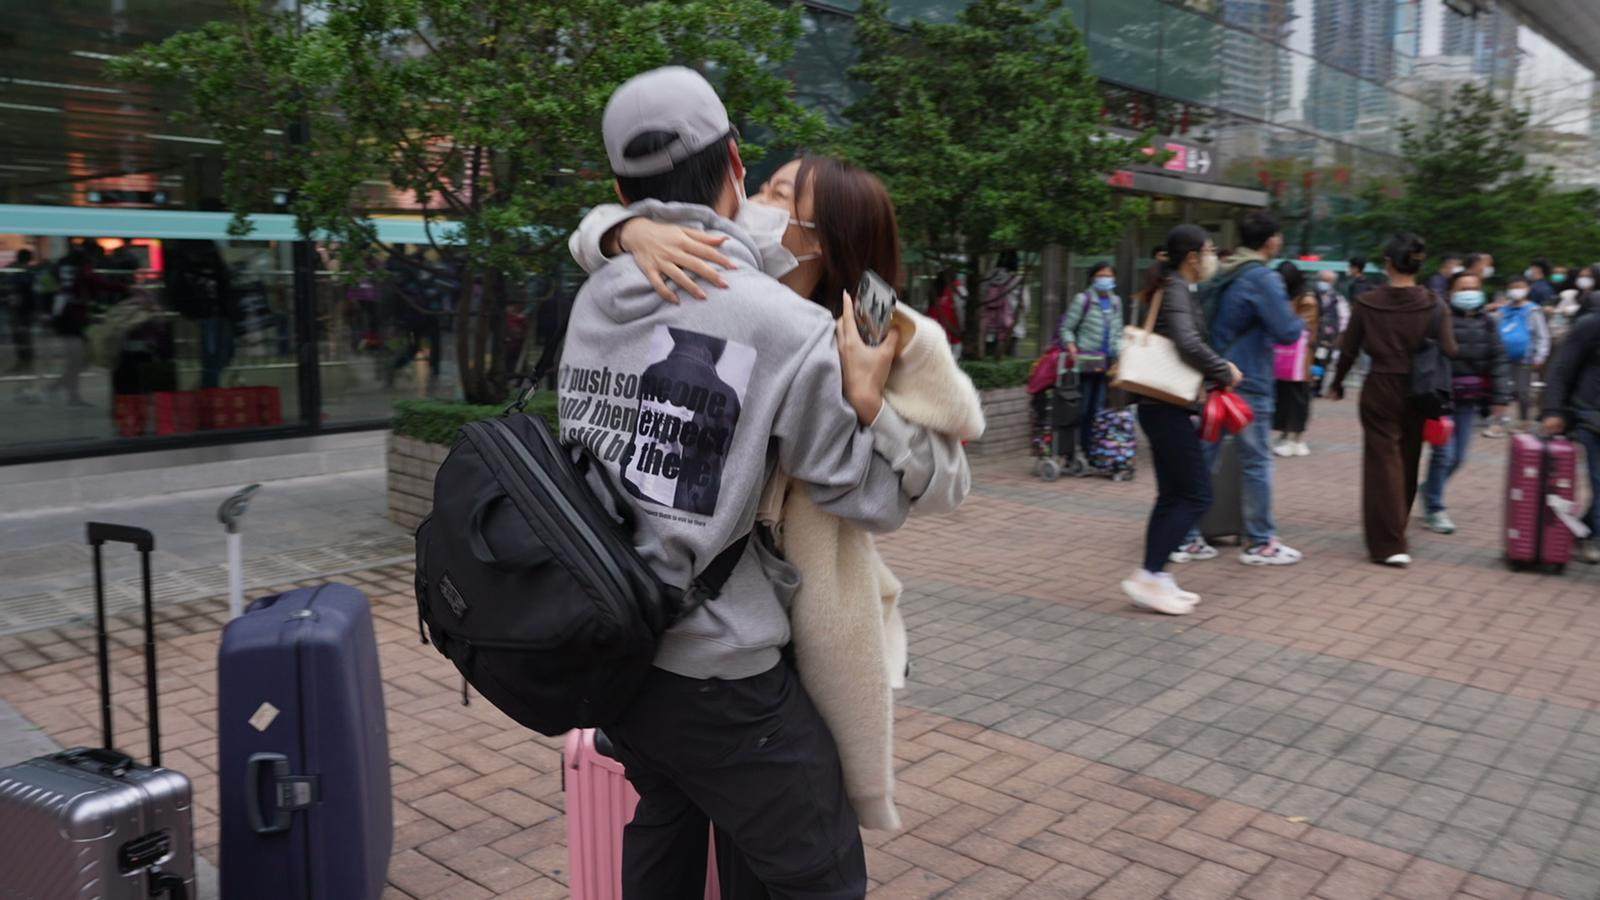 Engineer Zhou Yuhang and his girlfriend Karin Xu meet for the first time in six months. Photo: Handout